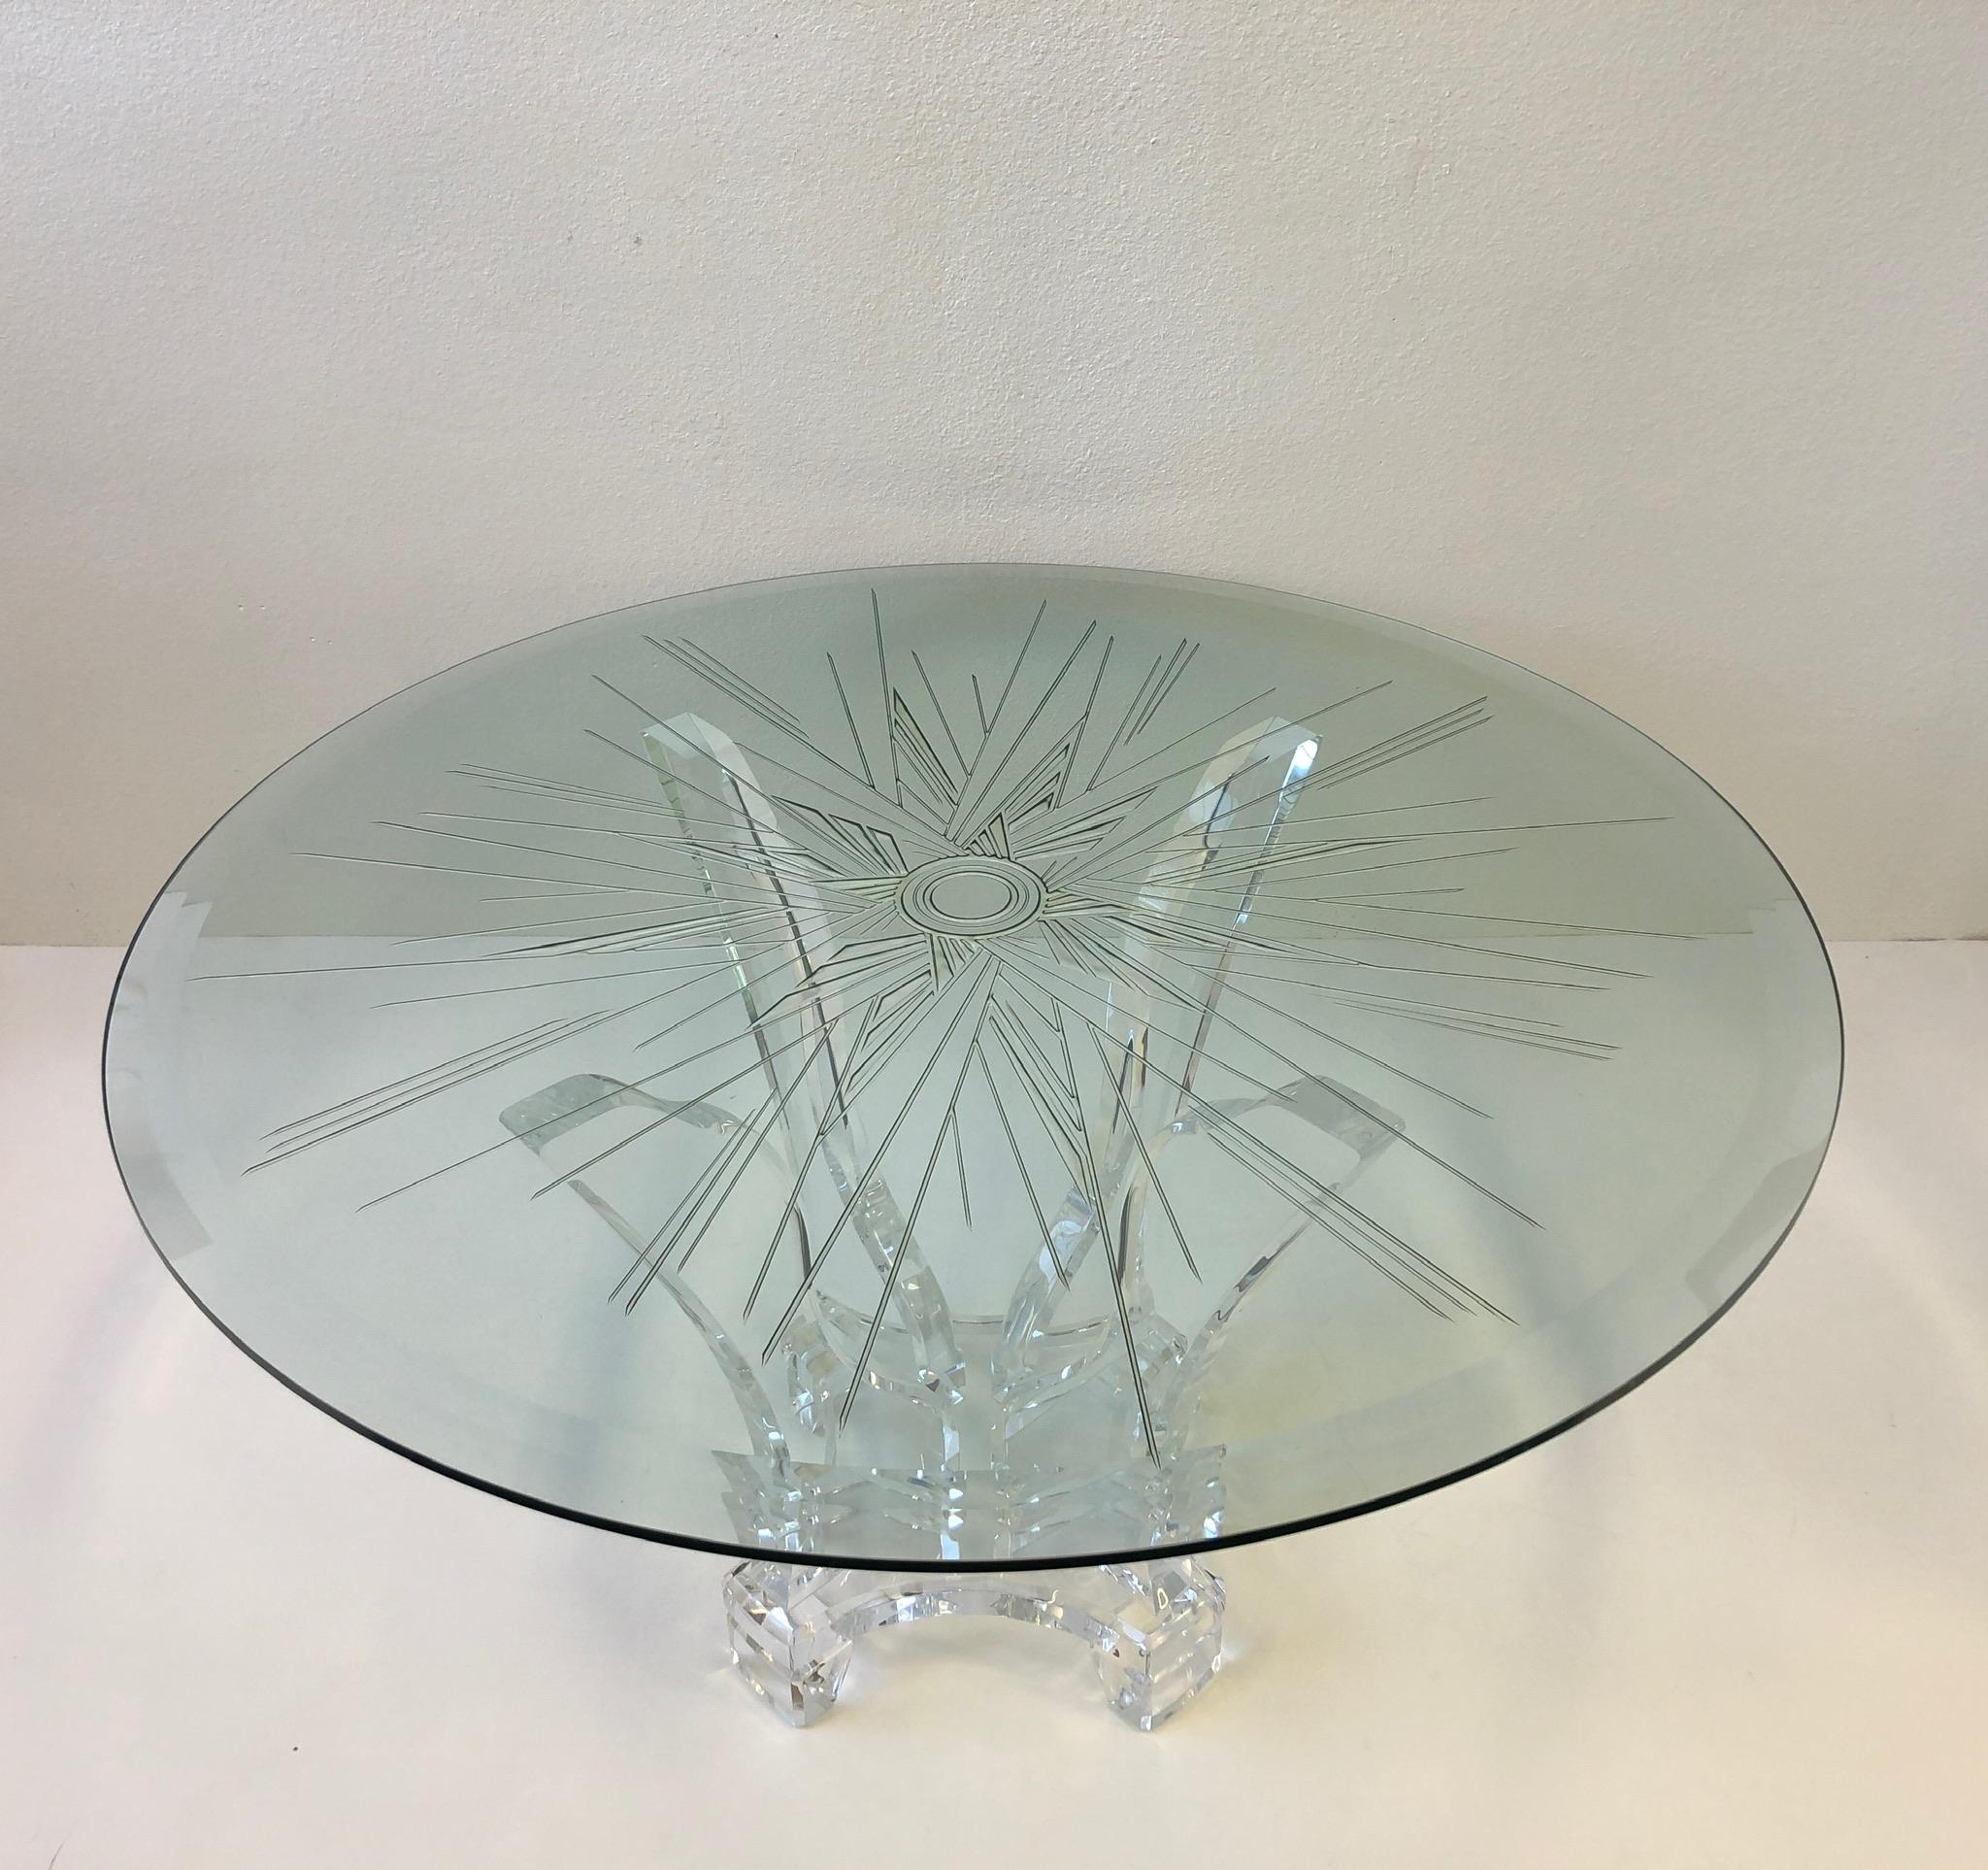 A glamorous thick Lucite table base with a custom carved starburst design glass top. The table was designed by Lion in Frost in the 1980s. The glass top is 3/4” thick with a double beveled. The table is in excellent condition with some minor wear